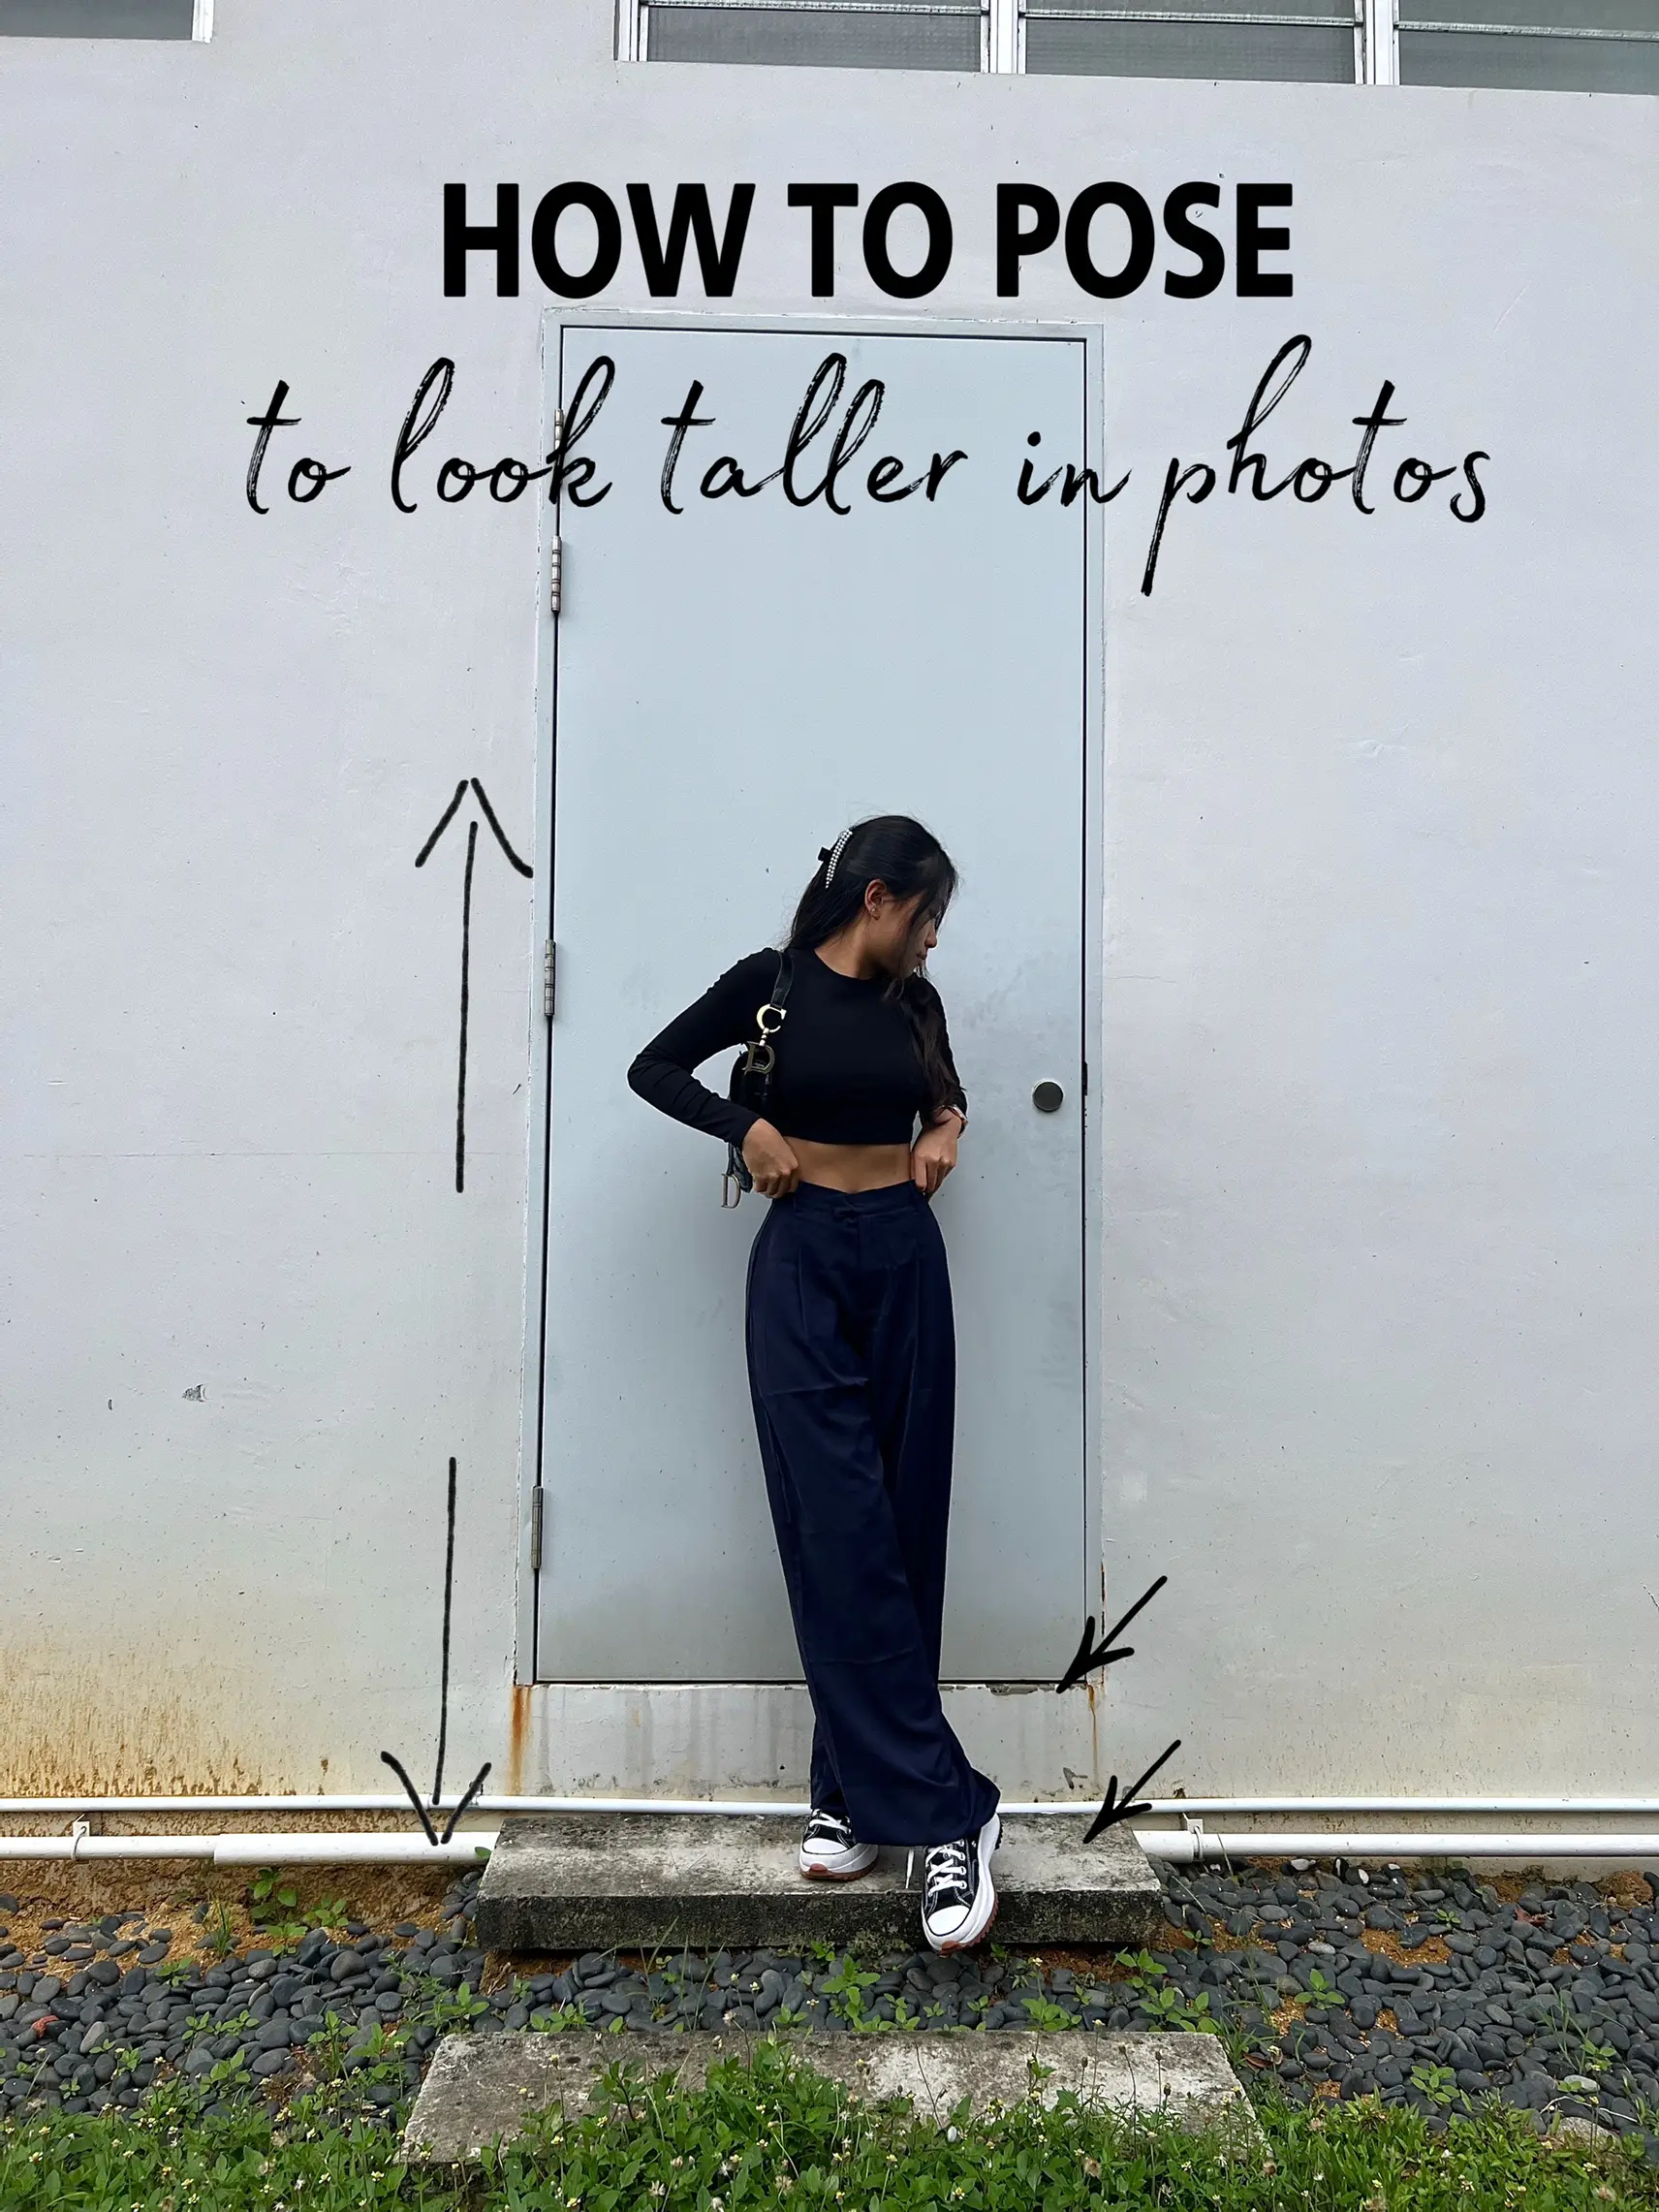 My go-to trick to appear taller in my photos 😉